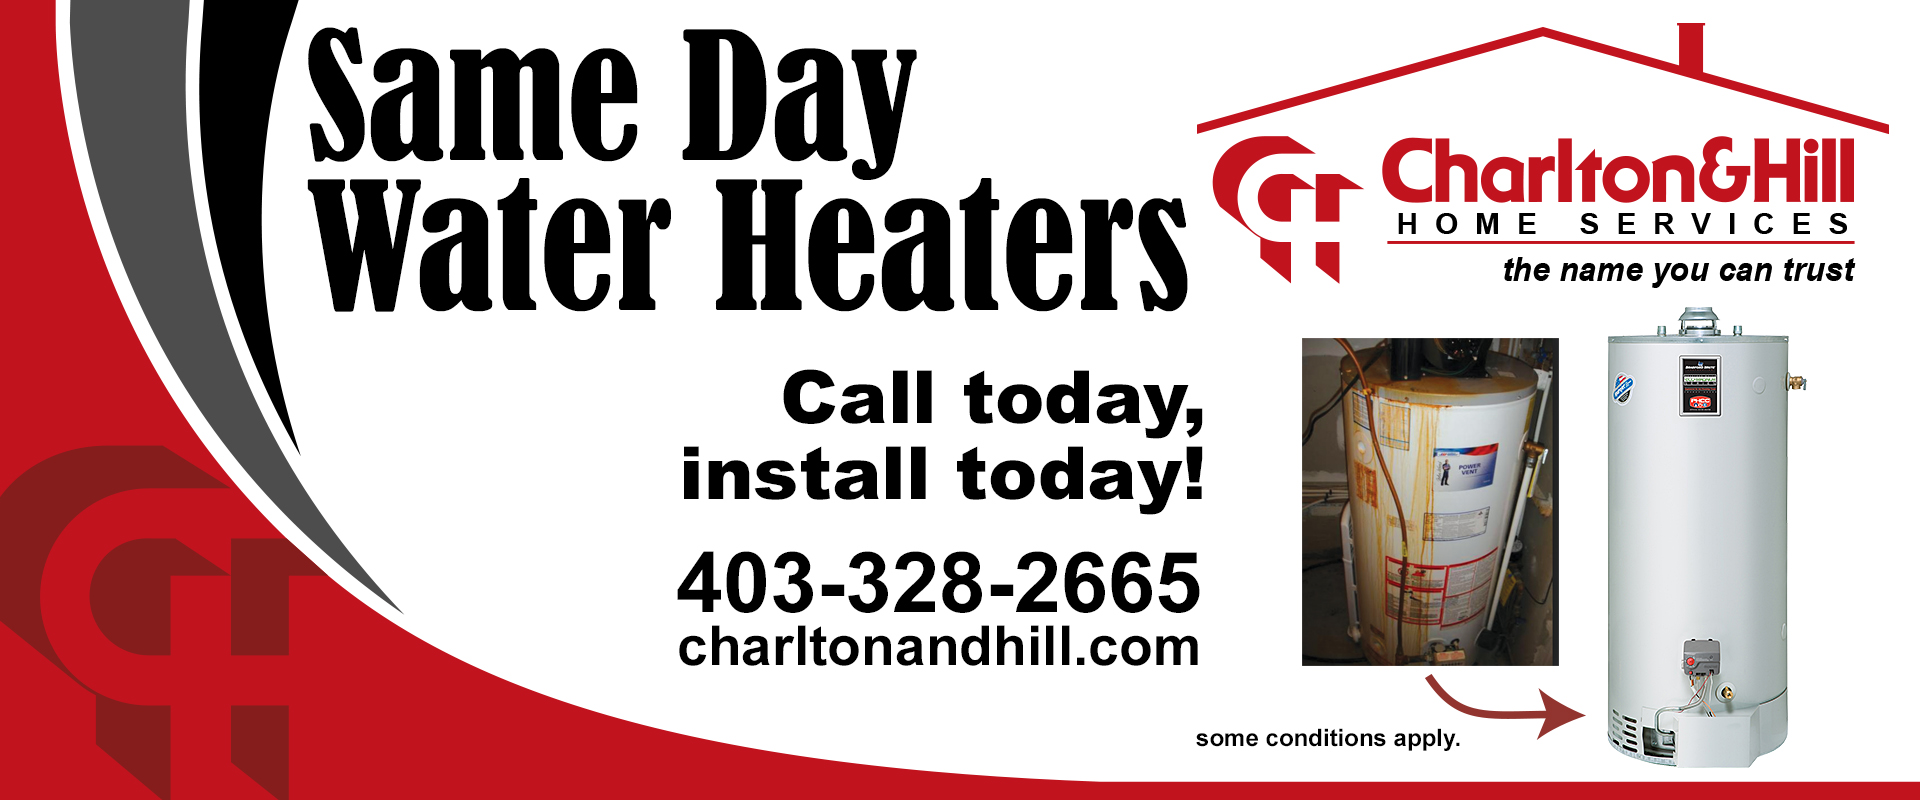 Same Day Water Heaters Banner Image